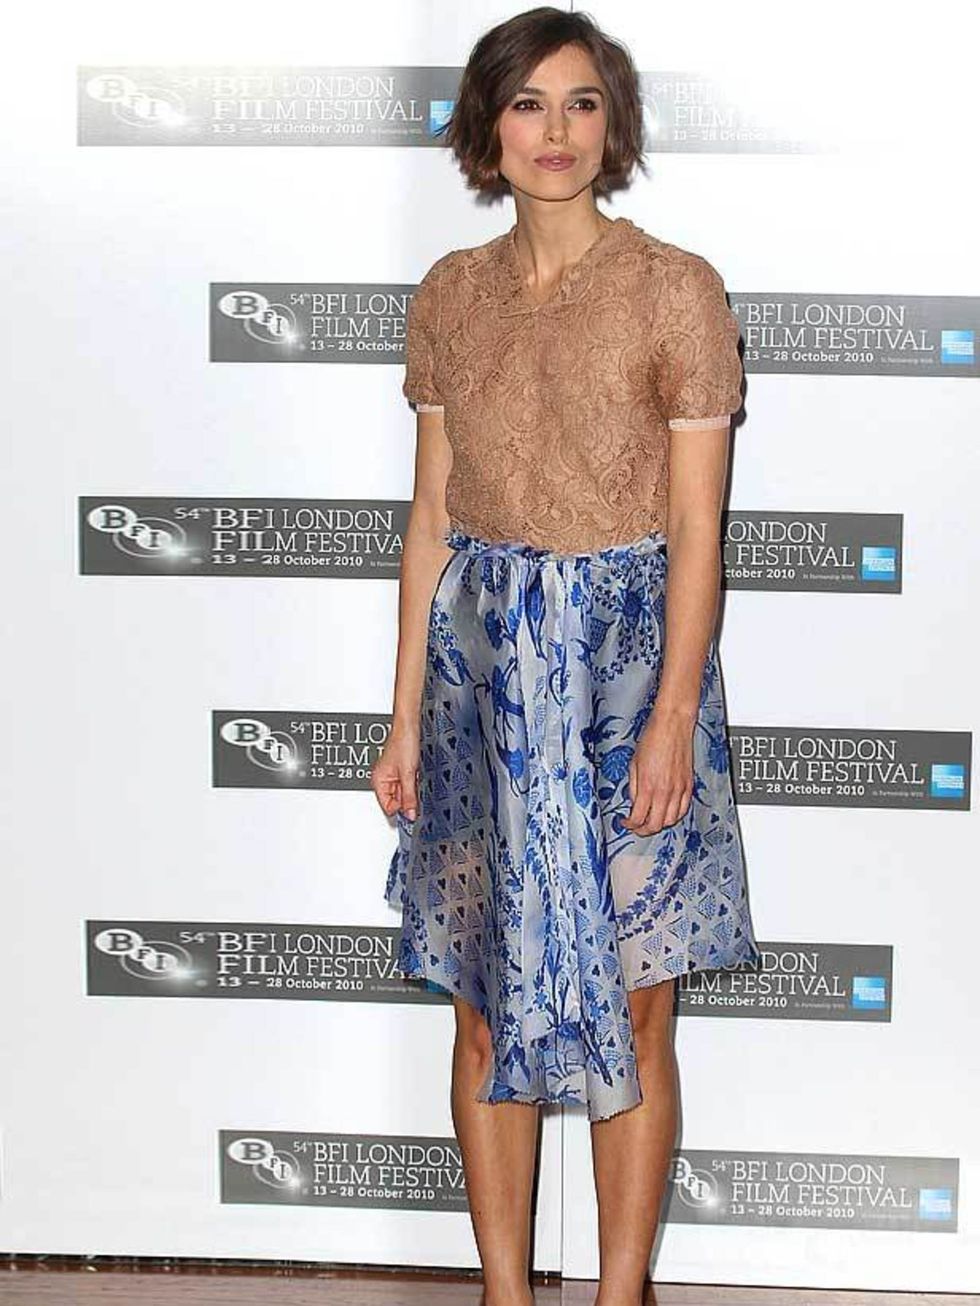 <p><a href="http://www.elleuk.com/starstyle/style-files/%28section%29/keira-knightley/%28offset%29/0/%28img%29/693978">Keira Knightley</a> wearing a <a href="http://www.elleuk.com/catwalk/collections/rodarte/spring-summer-2011/collection">Rodarte</a> Spri